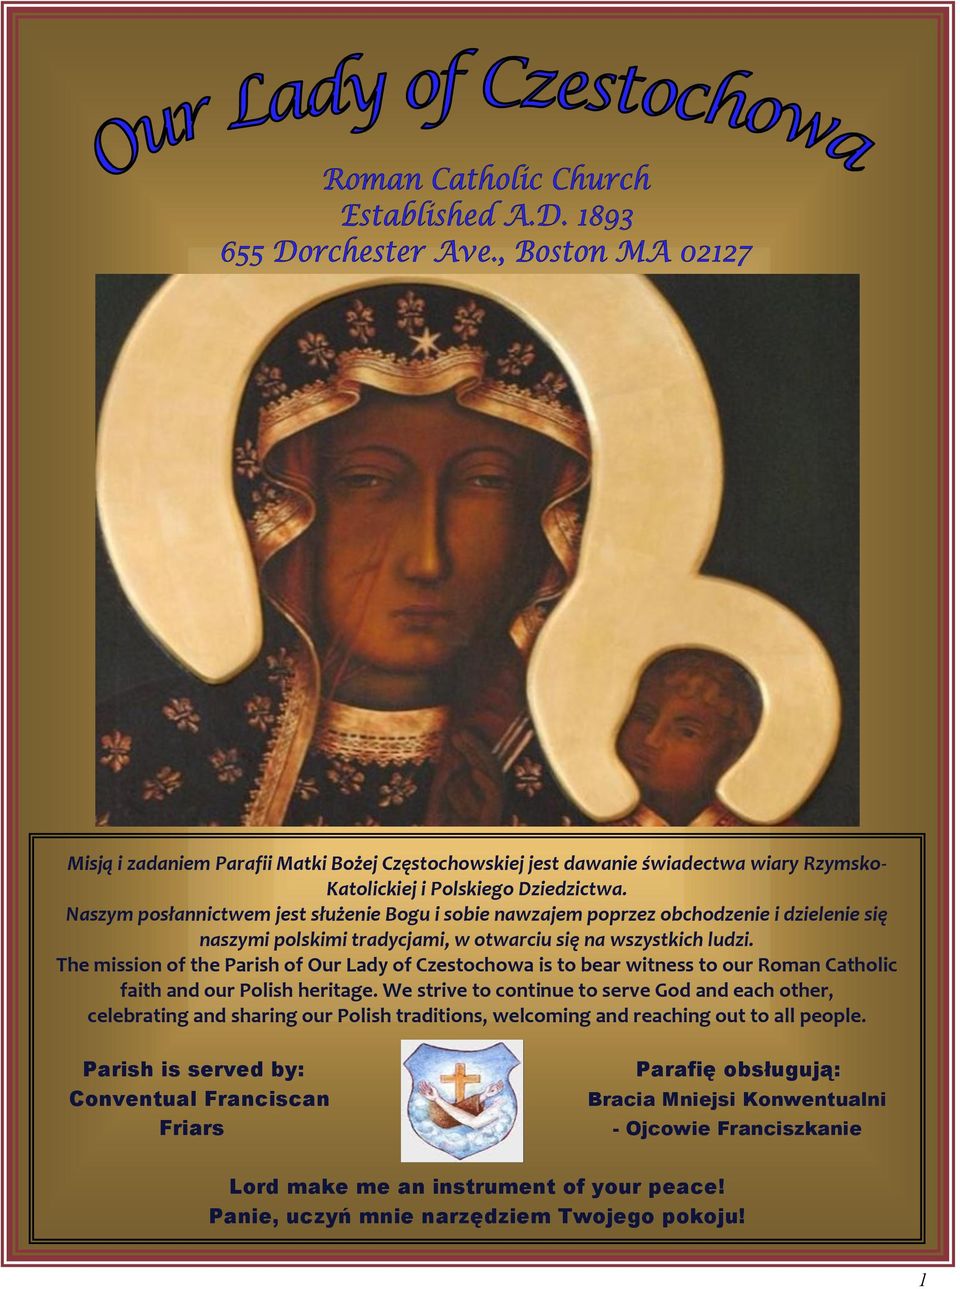 The mission of the Parish of Our Lady of Czestochowa is to bear witness to our Roman Catholic faith and our Polish heritage.